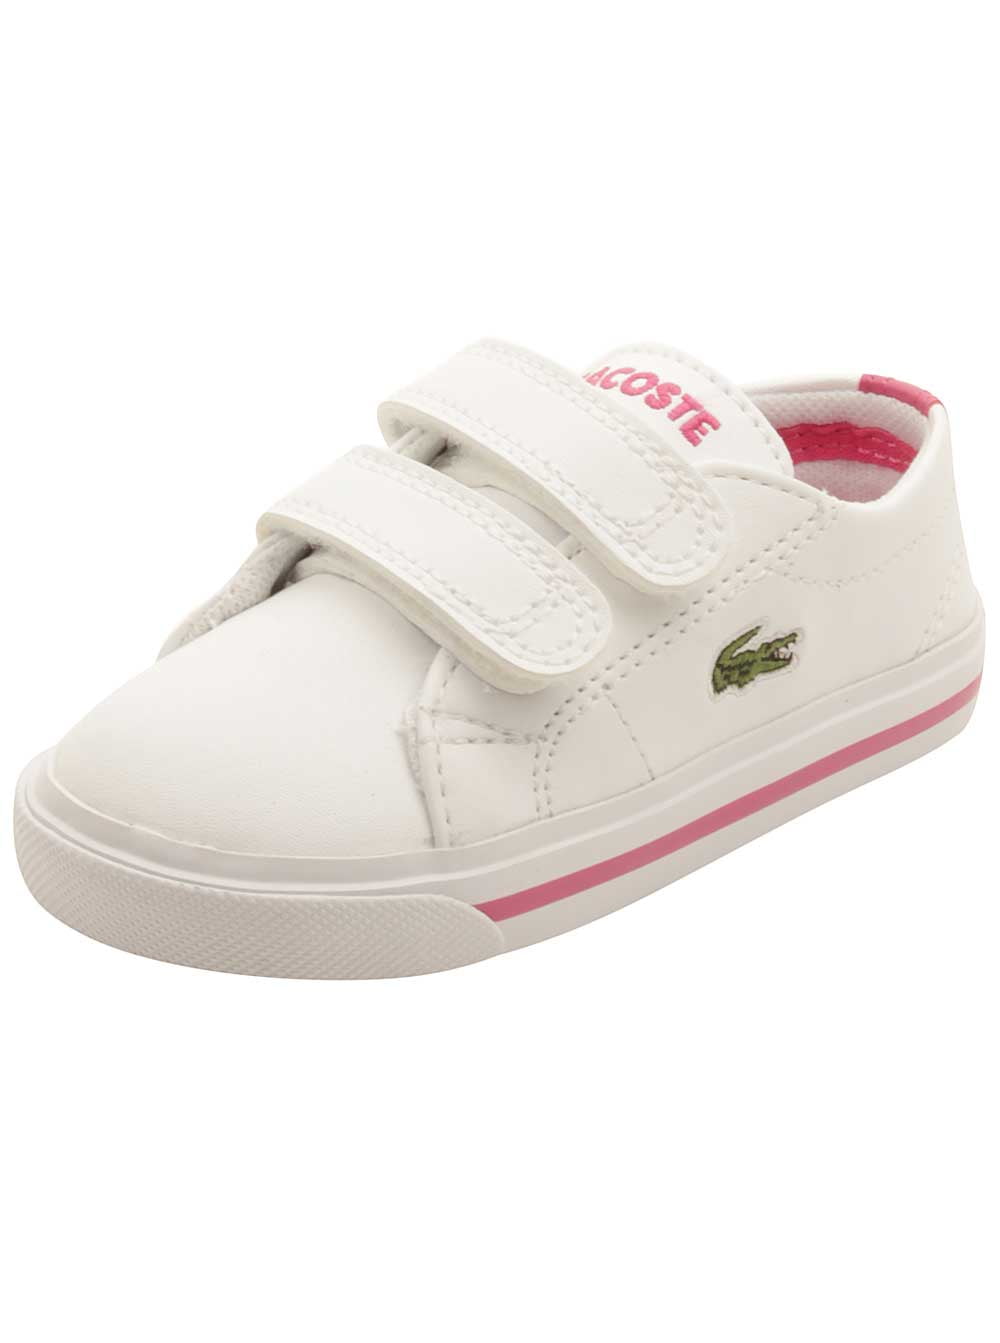 Lacoste Infant Marcel 117 Sneakers in White/Pink